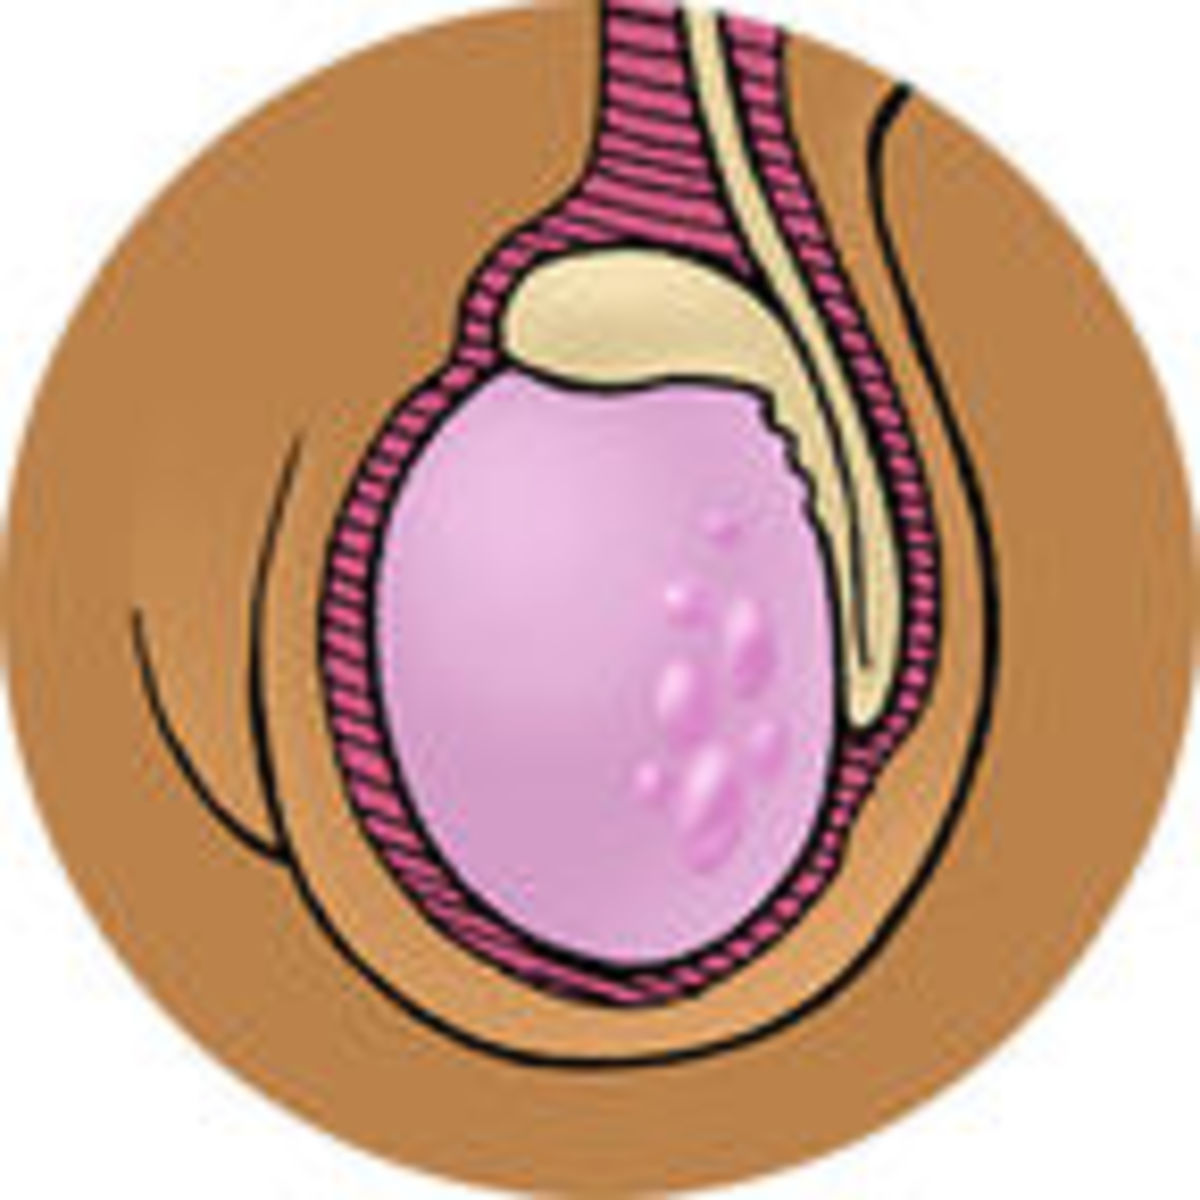 Ball Fondling Caption - How to Do a Testicle Exam, and Five Reasons Men Avoid Them ...